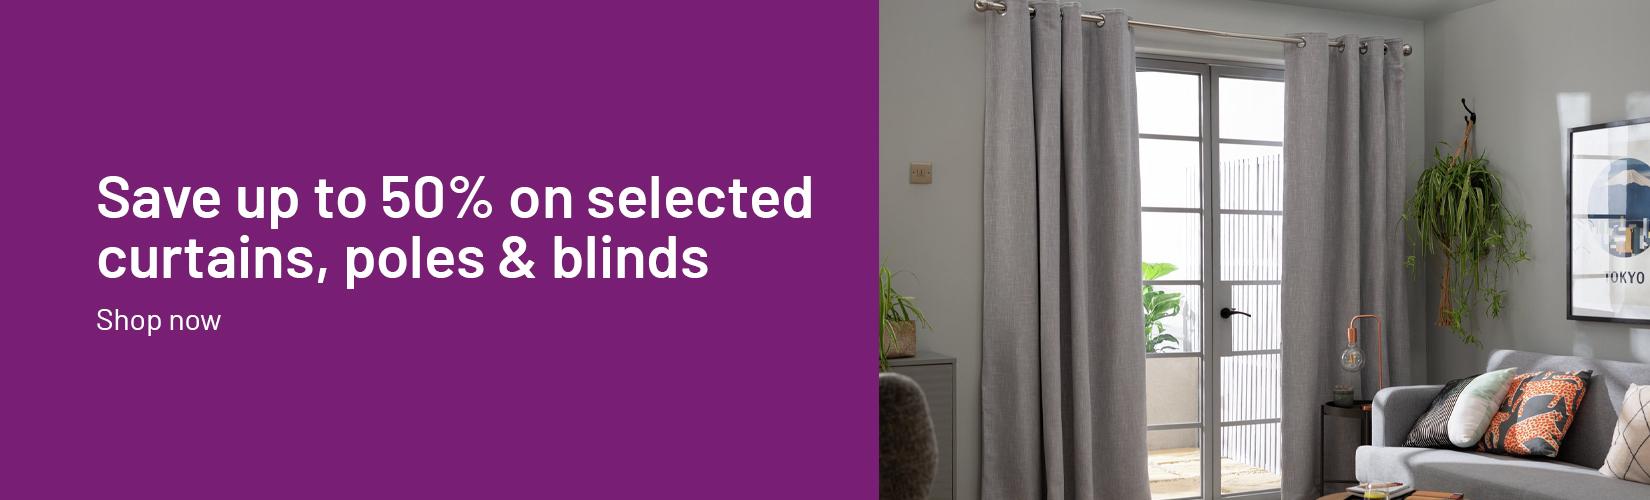 Save up to 50% on selected curtains, poles & blinds.